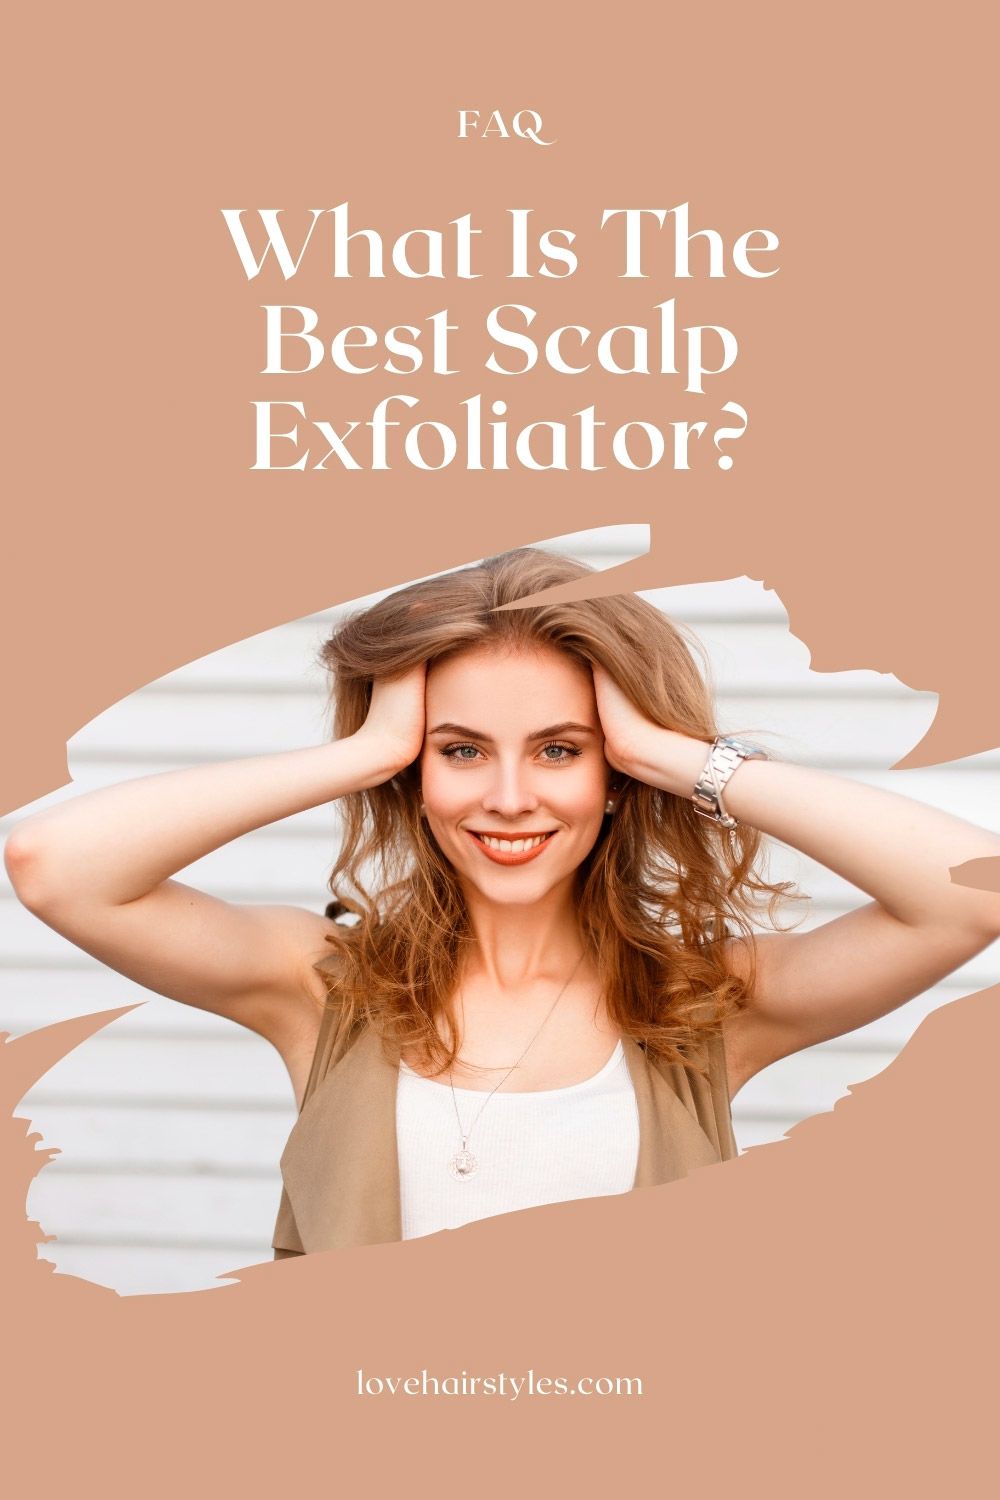 What Is The Best Scalp Exfoliator?